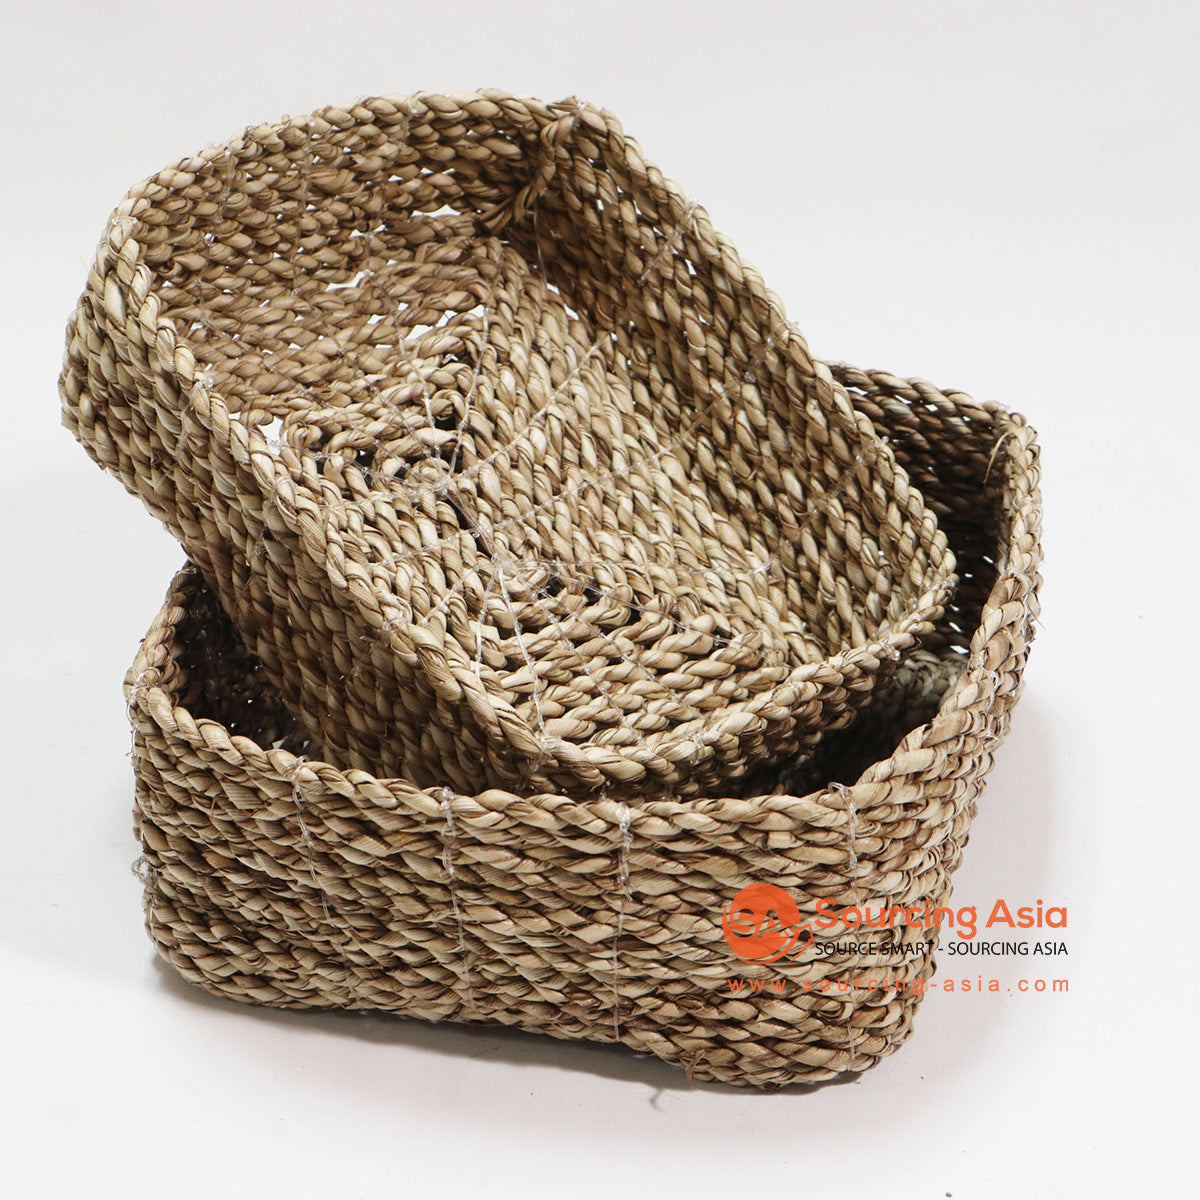 HBSC047-1 SET OF TWO NATURAL SEAGRASS TRINKET BASKETS